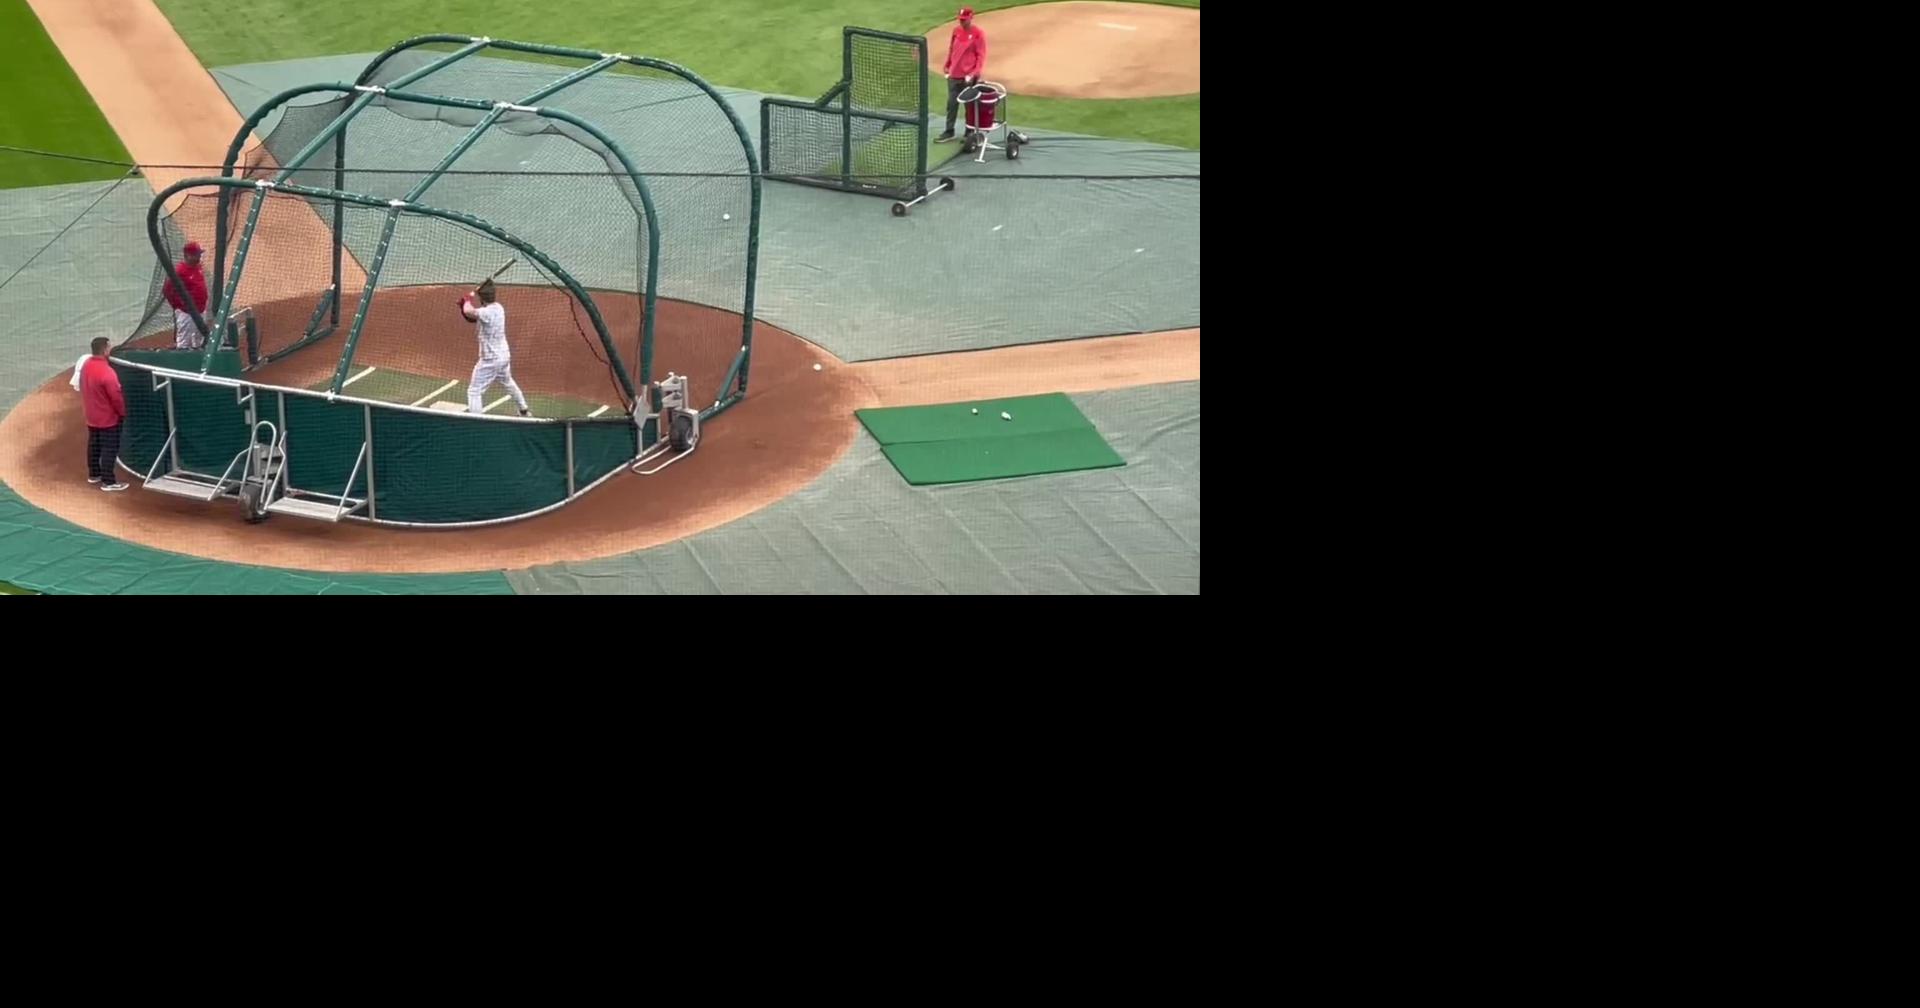 Harper puts on encouraging batting practice show in Philly